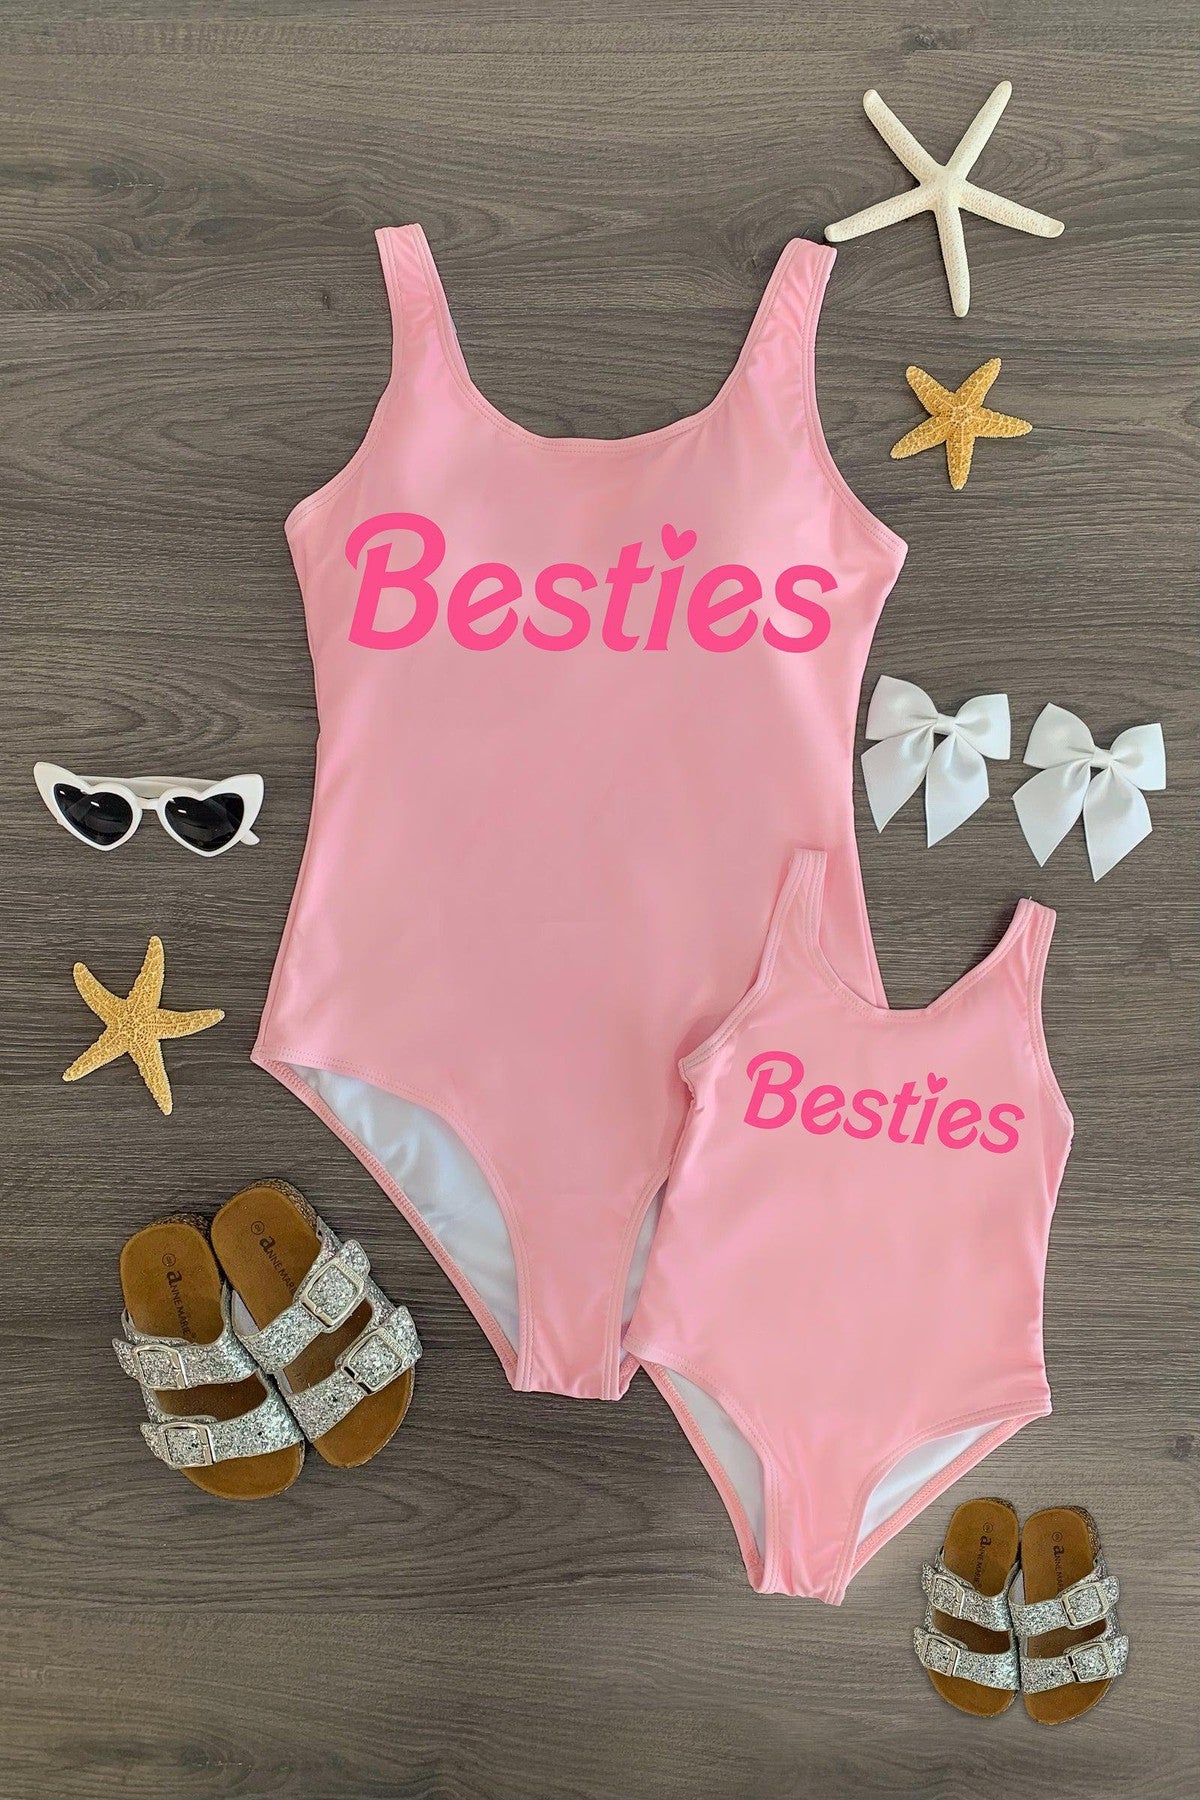 Mom & Me - "Besties" Pink One Piece Swimsuit - Sparkle in Pink